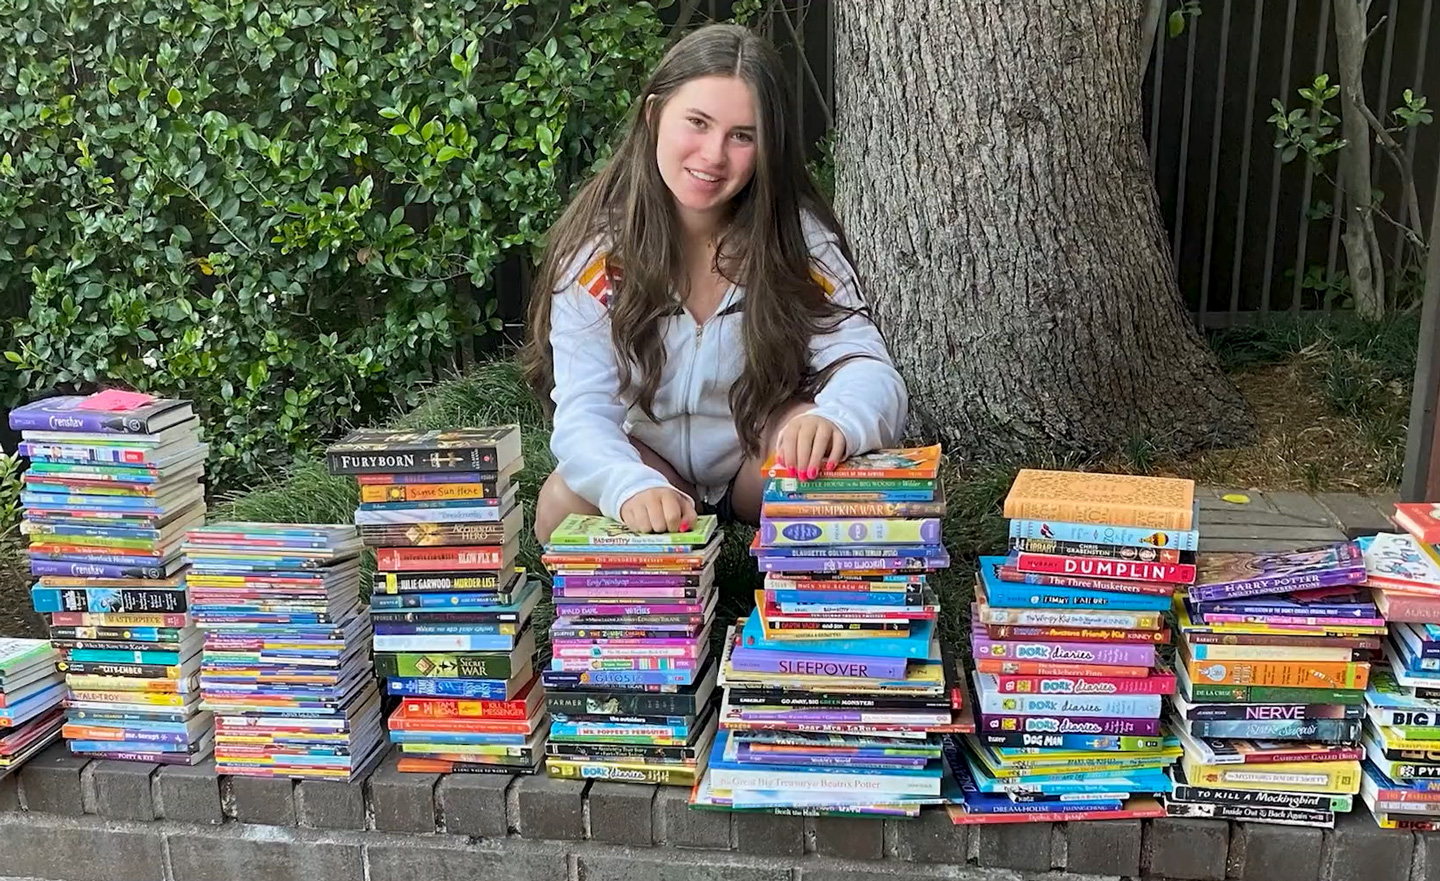 Alana poses with several stacks of books.